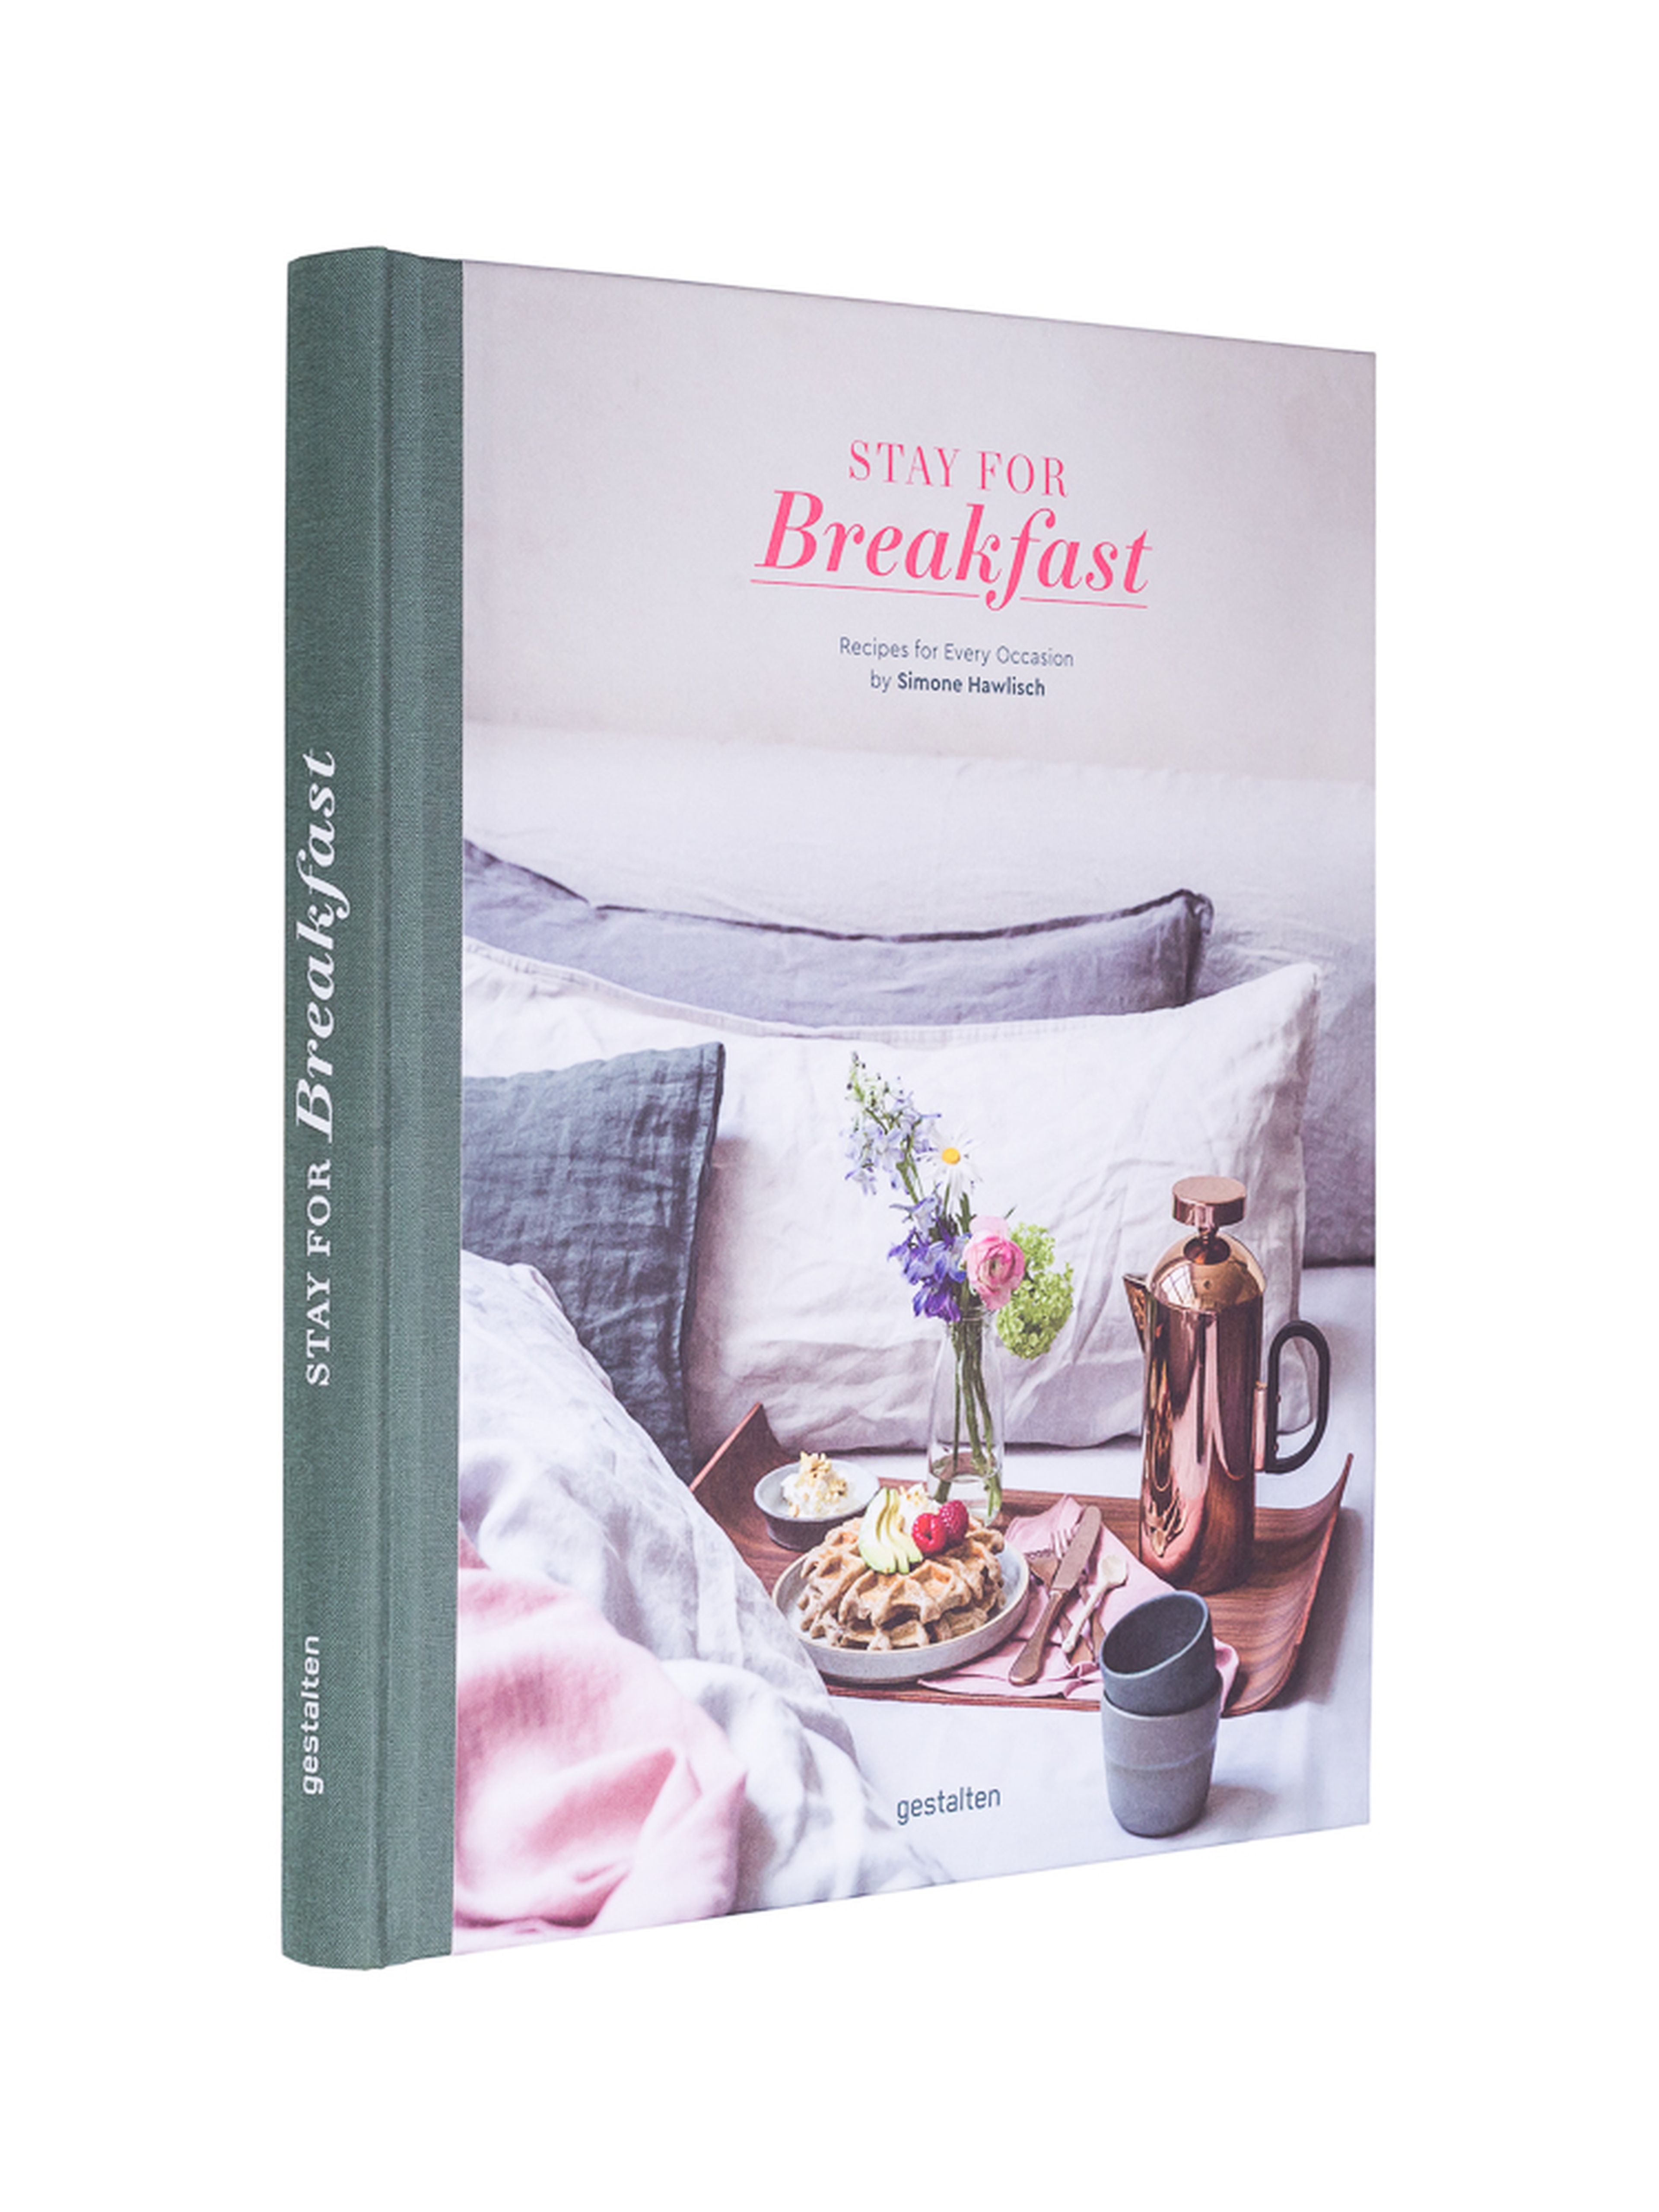 Find more ideas for breakfast recipes in the cookbook "Stay For Breakfast" (appeared in the publishing company gestalten)
https://gestalten.com/products/stay-for-breakfast